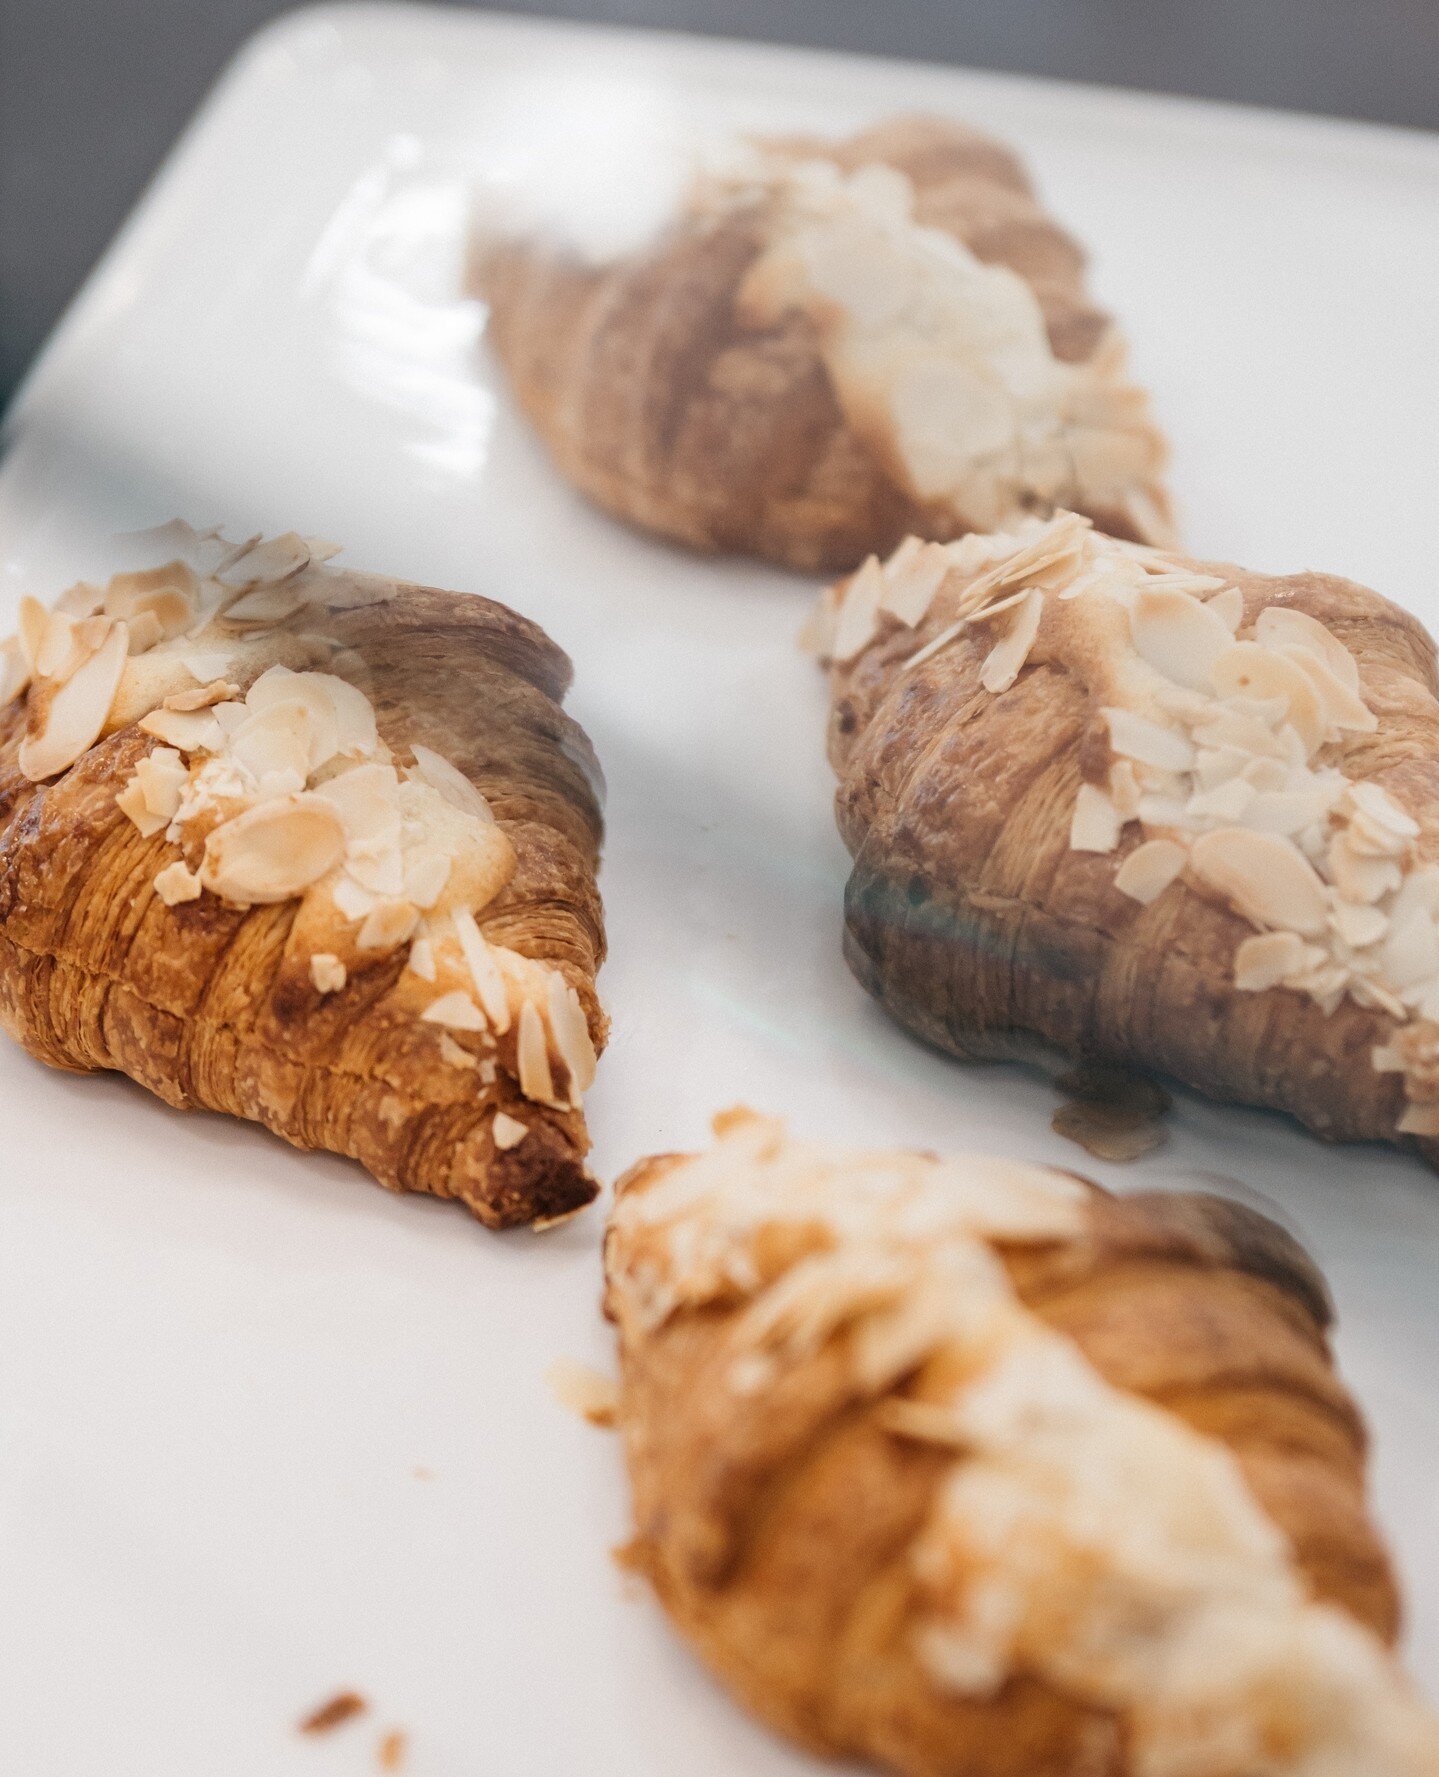 Plain croissant or almond croissant?⁠
⁠
Get your croissant fix at Kahlo Bondi - a short walk away to some amazing local bakeries. You have to try:⁠
- Bennett St Dairy⁠
- Fran&ccedil;ois Artisan Baker⁠
- The TinPin Bakery